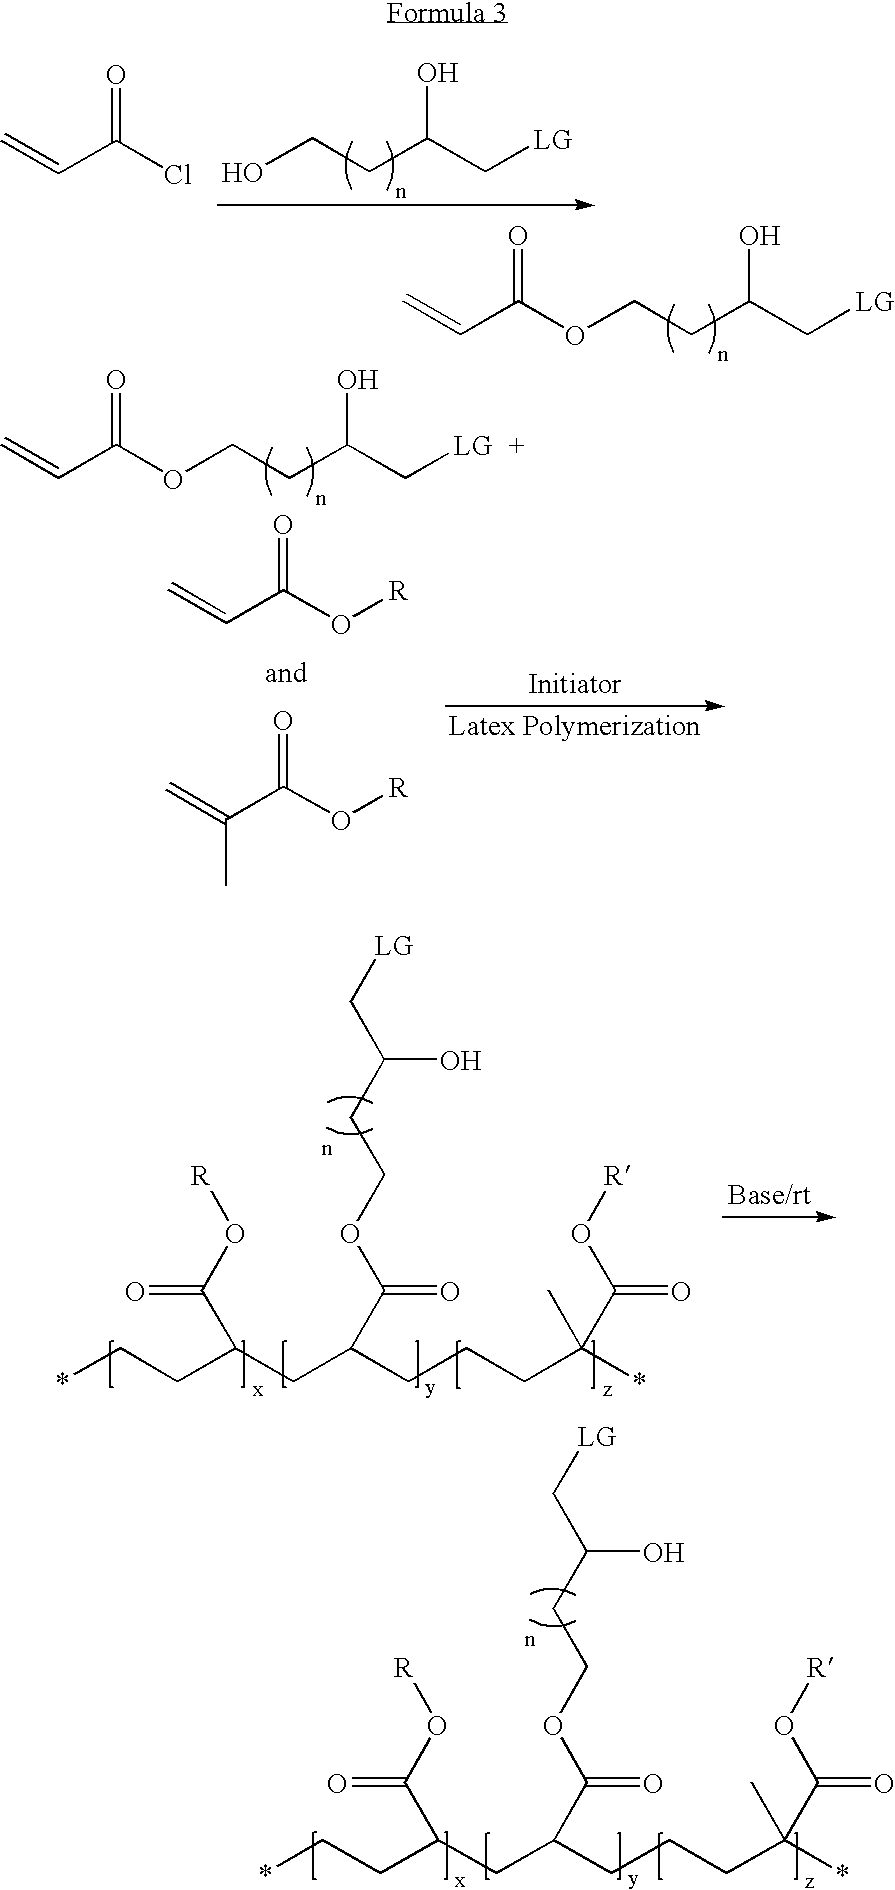 Latex particulates with epoxide functional groups